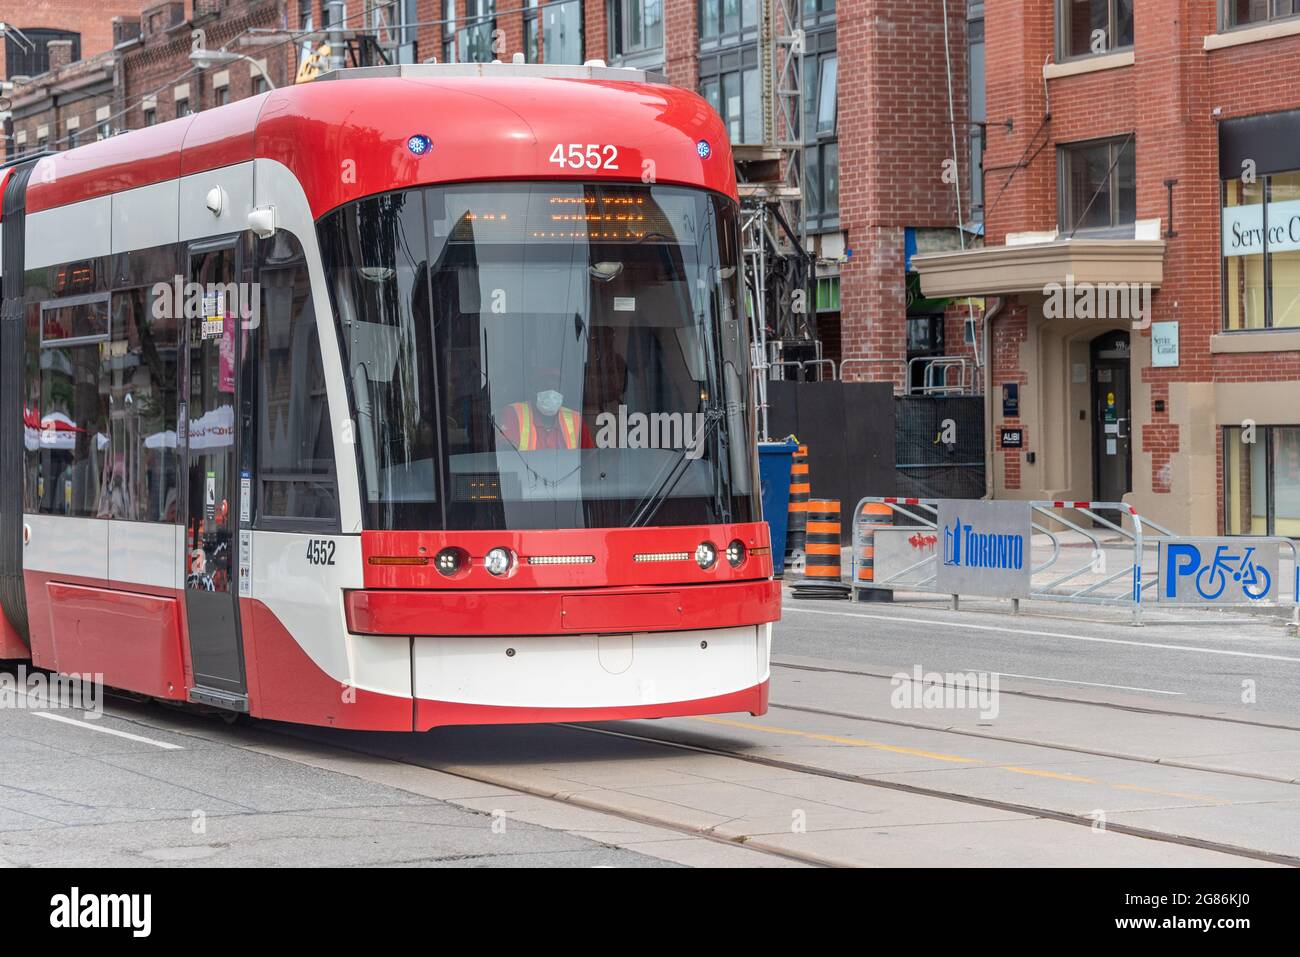 Bombardier Flexity Outlook streetcar or tram in the city center, Toronto, Canada Stock Photo